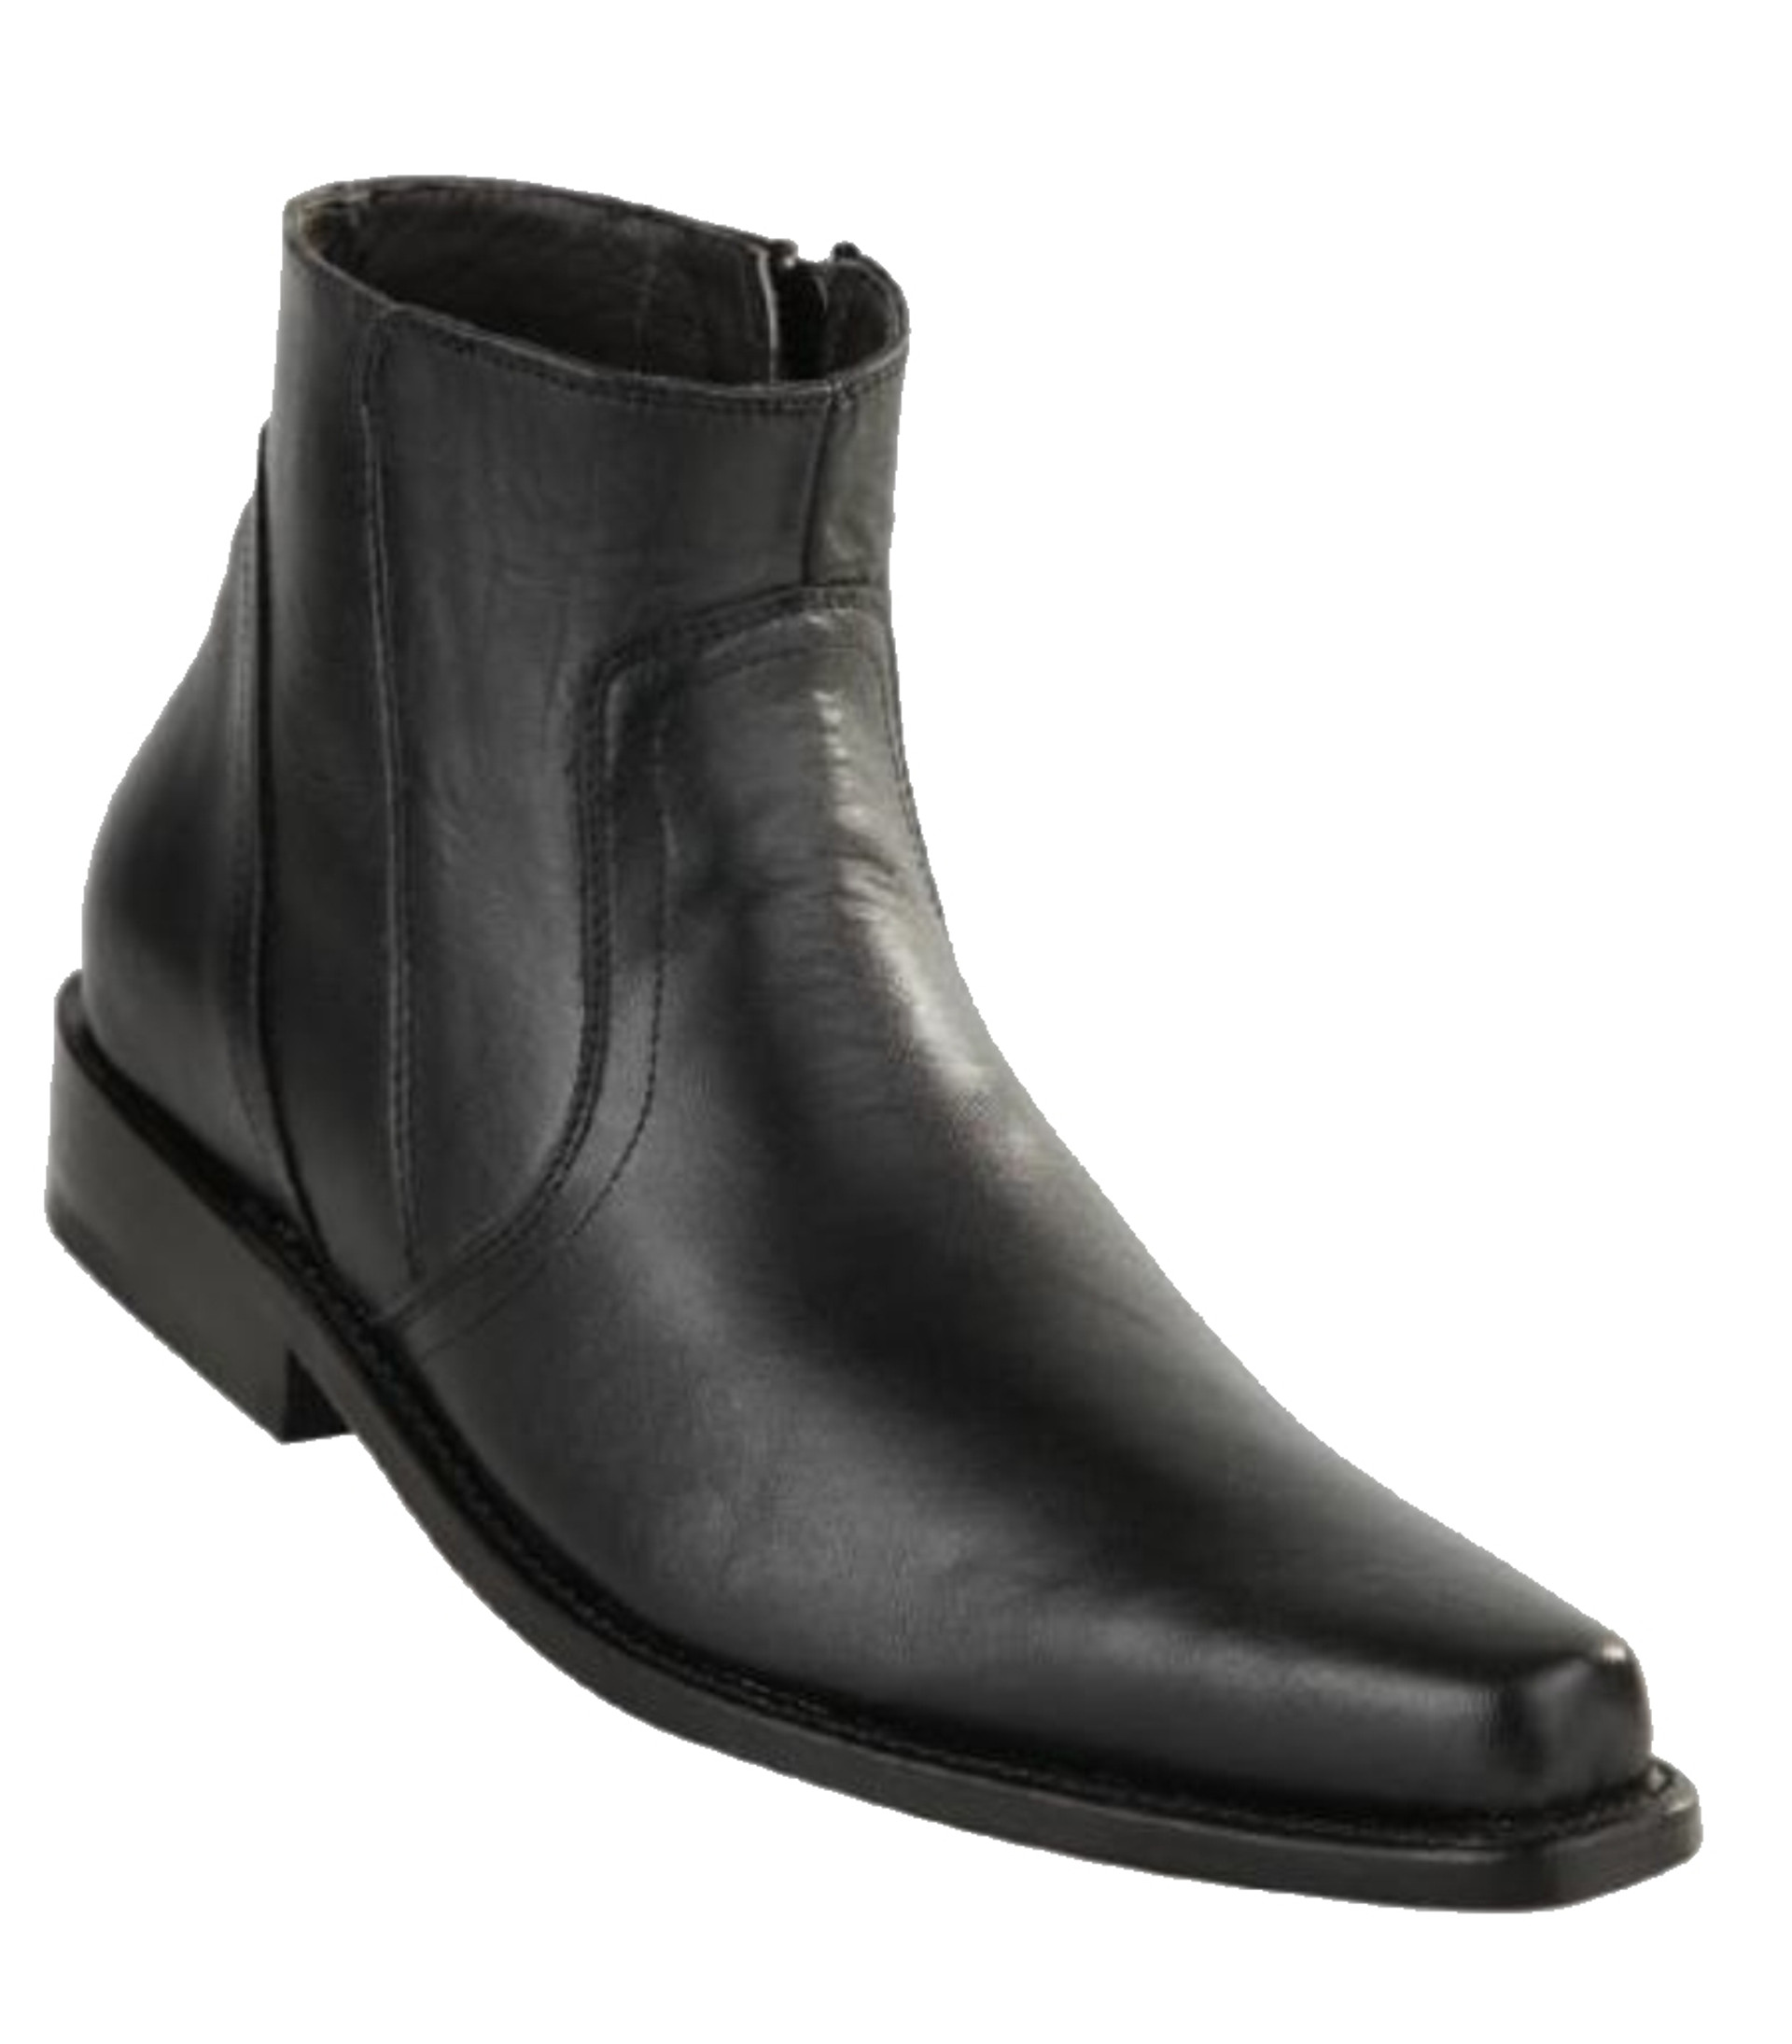 Original Michel Boot Co. Nappa Leather Side Zip Snub Toe Ankle Boot ...